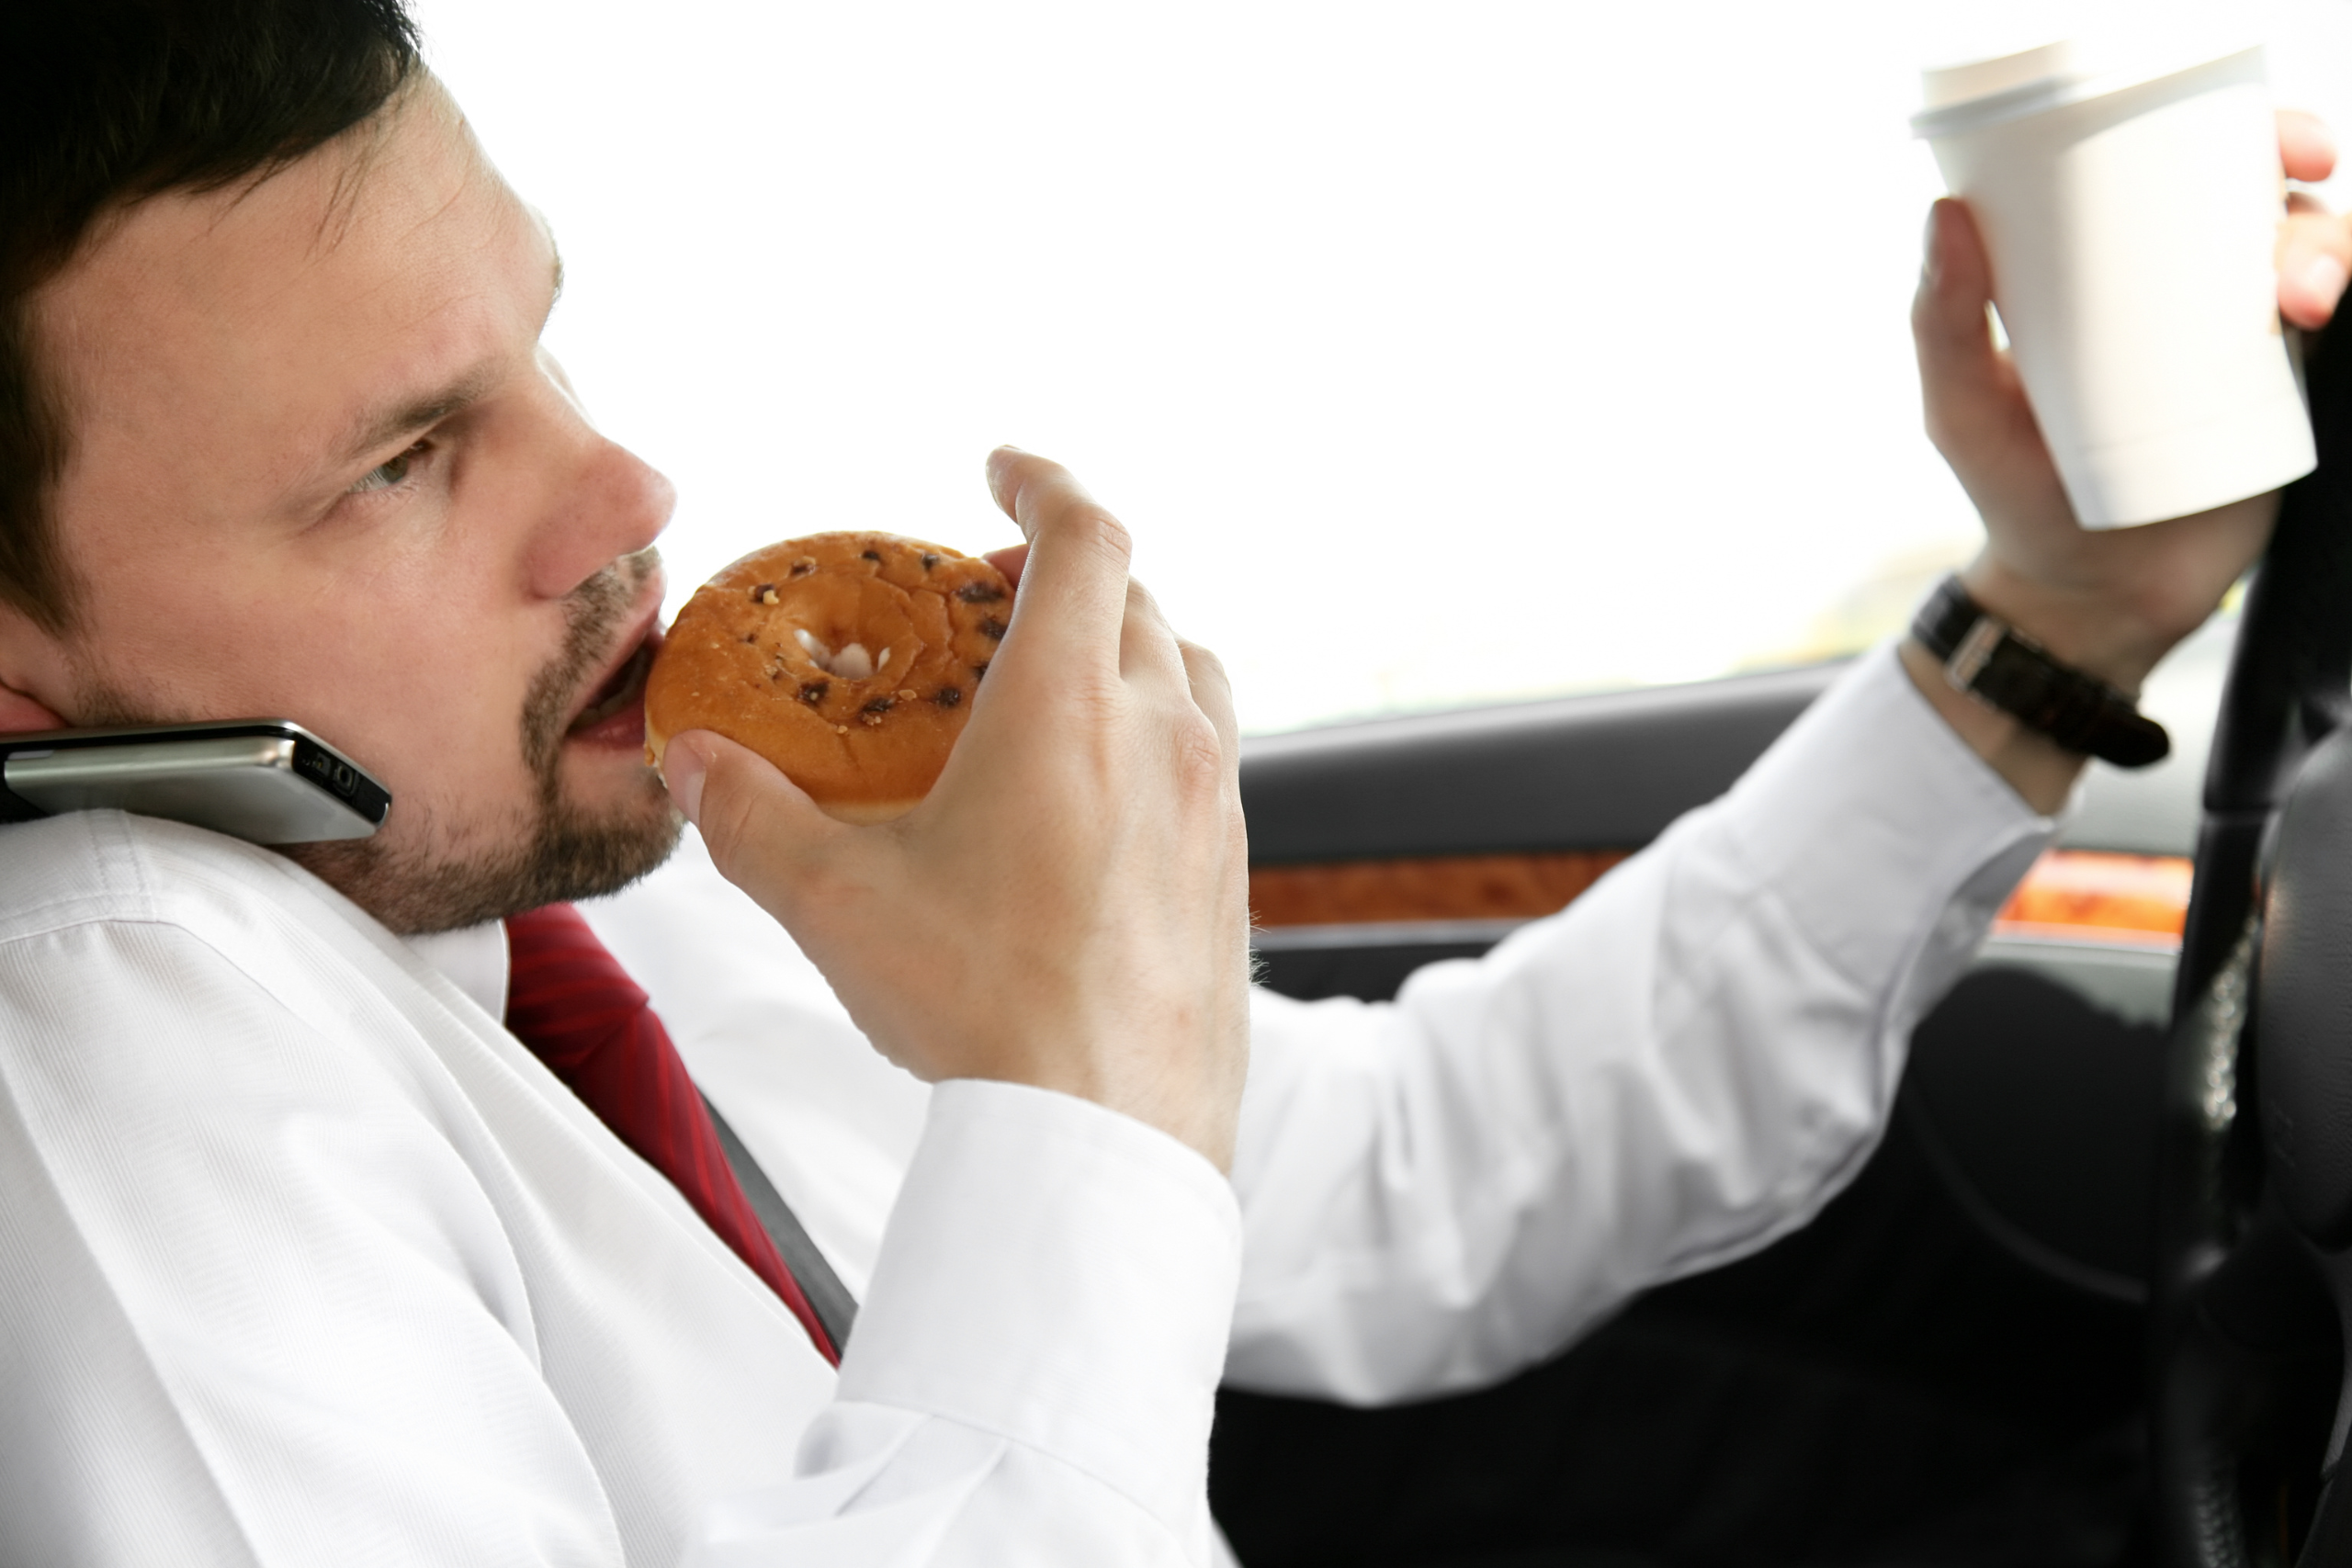 A man in a white shirt and red tie is seen multitasking while driving. He is biting into a donut with his right hand, holding a coffee cup in his left hand, and talking on a cell phone wedged between his shoulder and ear.